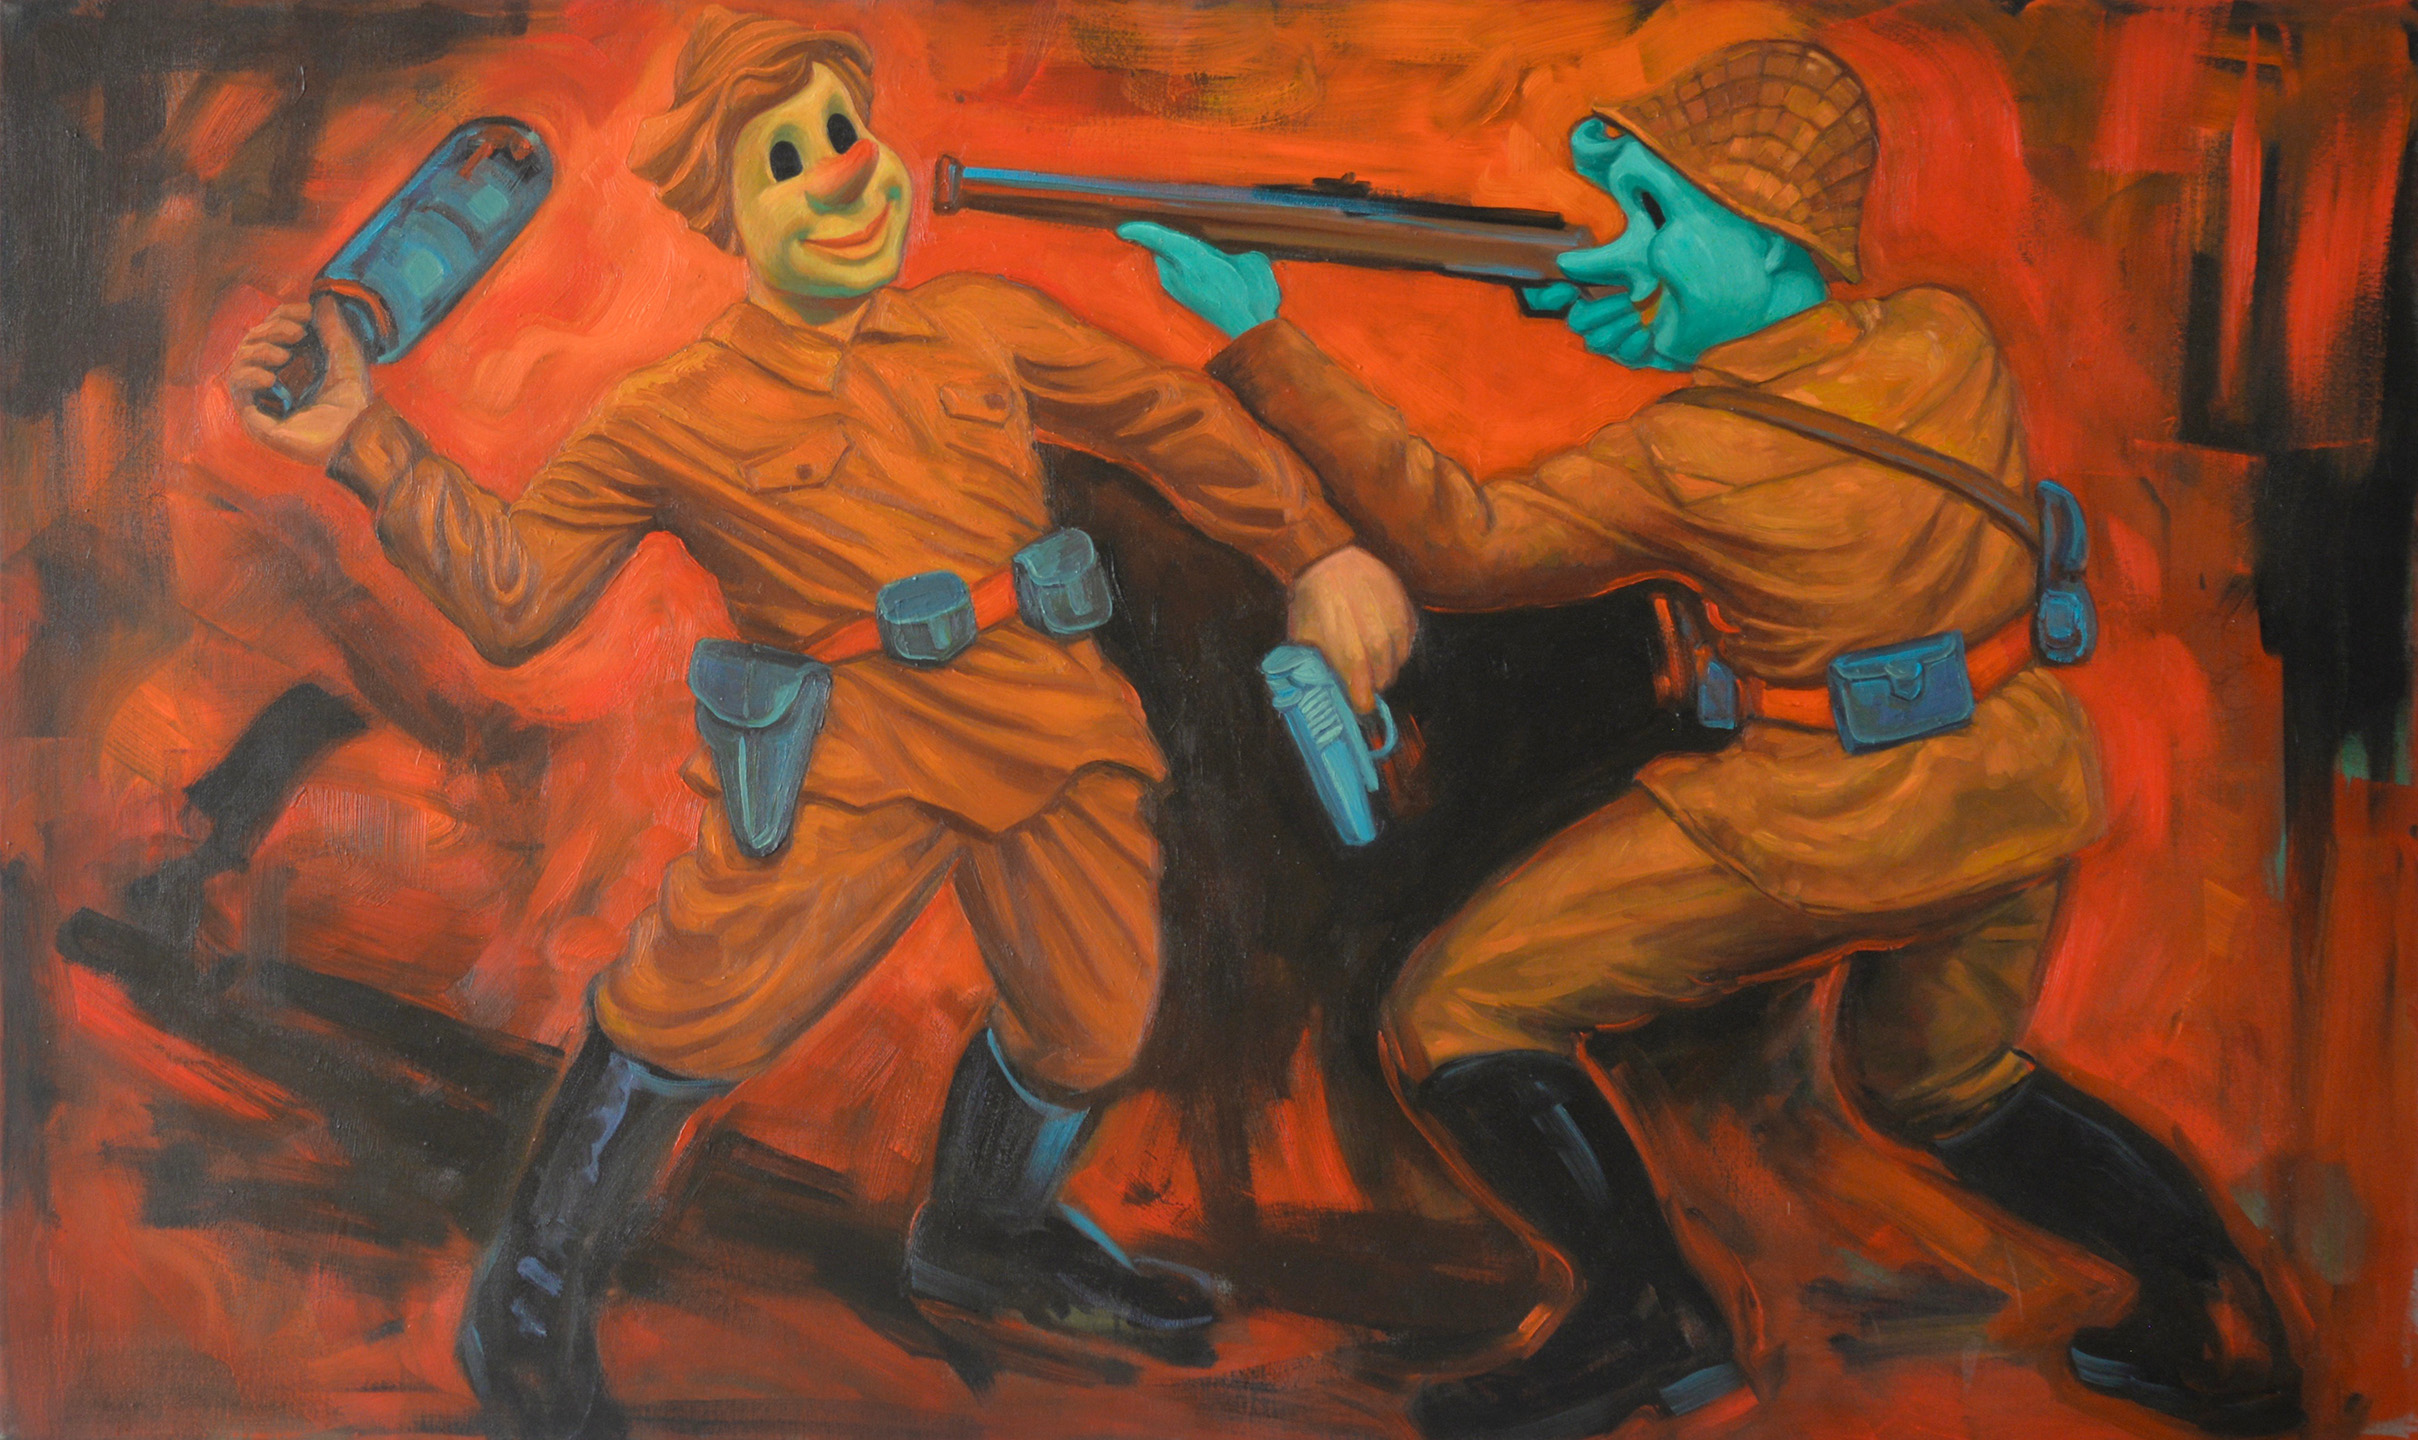 Vicki Khuzami Wrath, Pinocchio and the Seven Deadly Sins Oil on canvas 36” x 60”, 2015